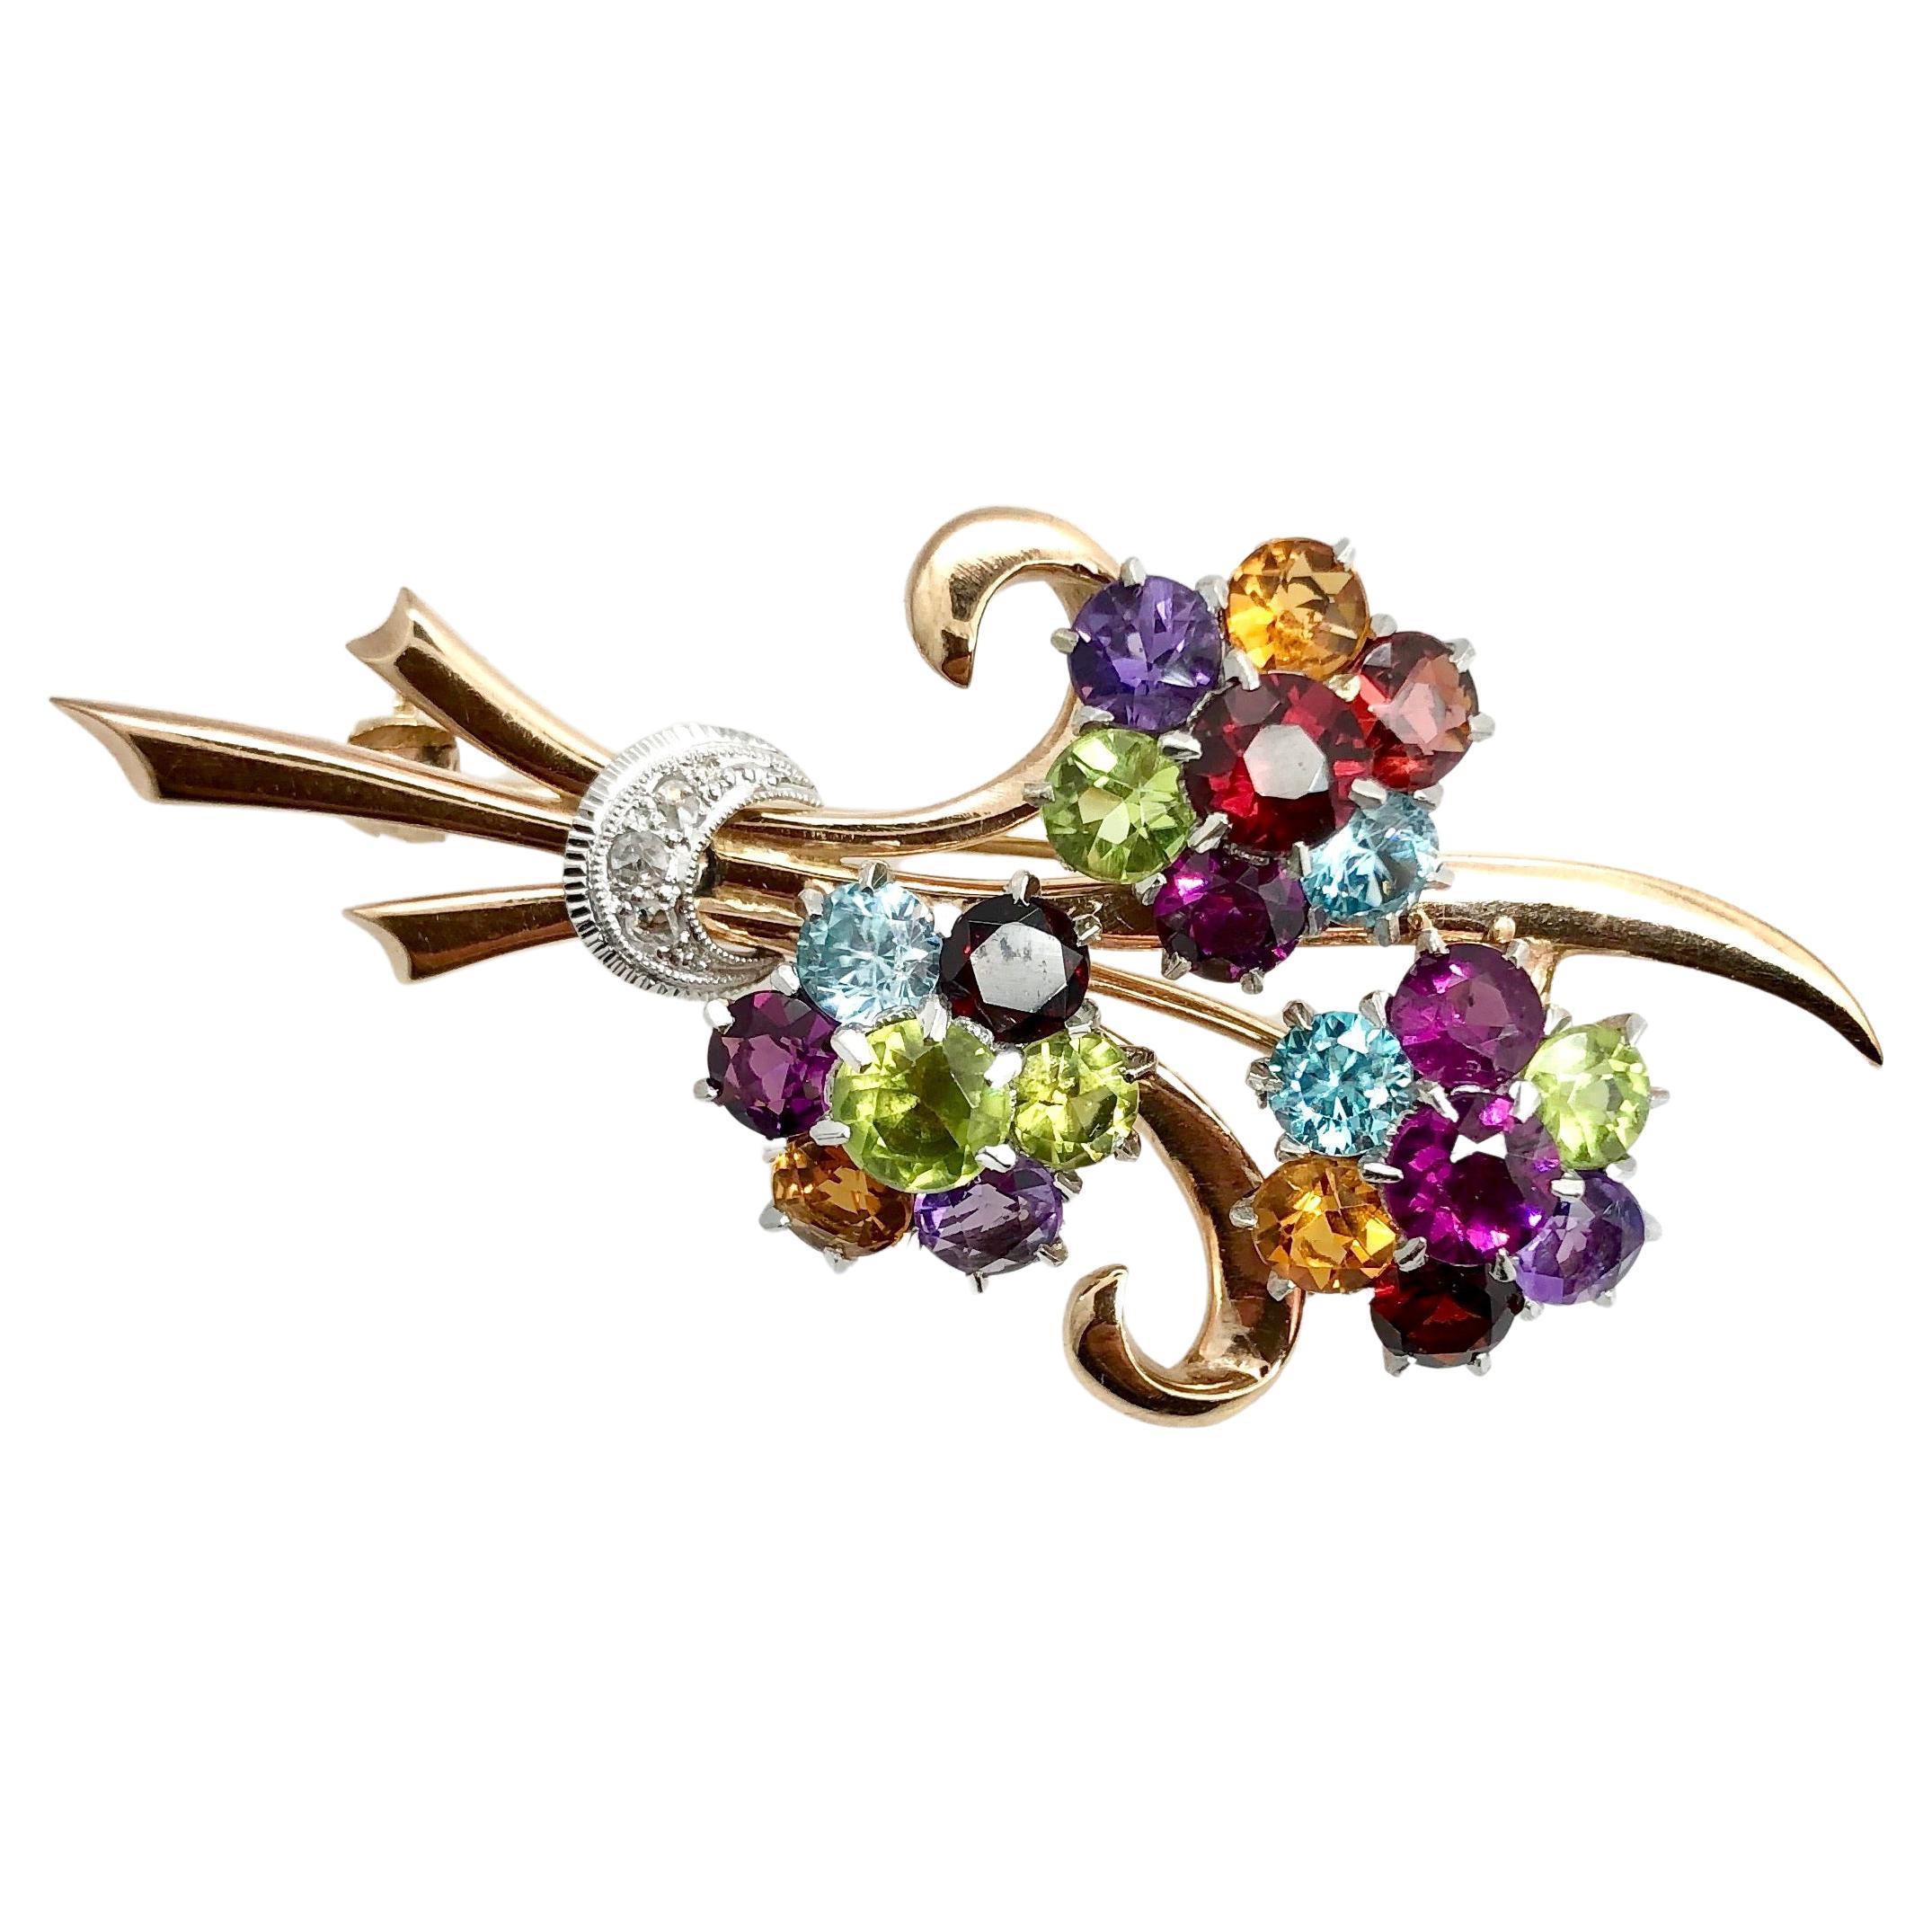 Large Flower Bouquet Gold Pin Brooch with Semi-Precious Stones